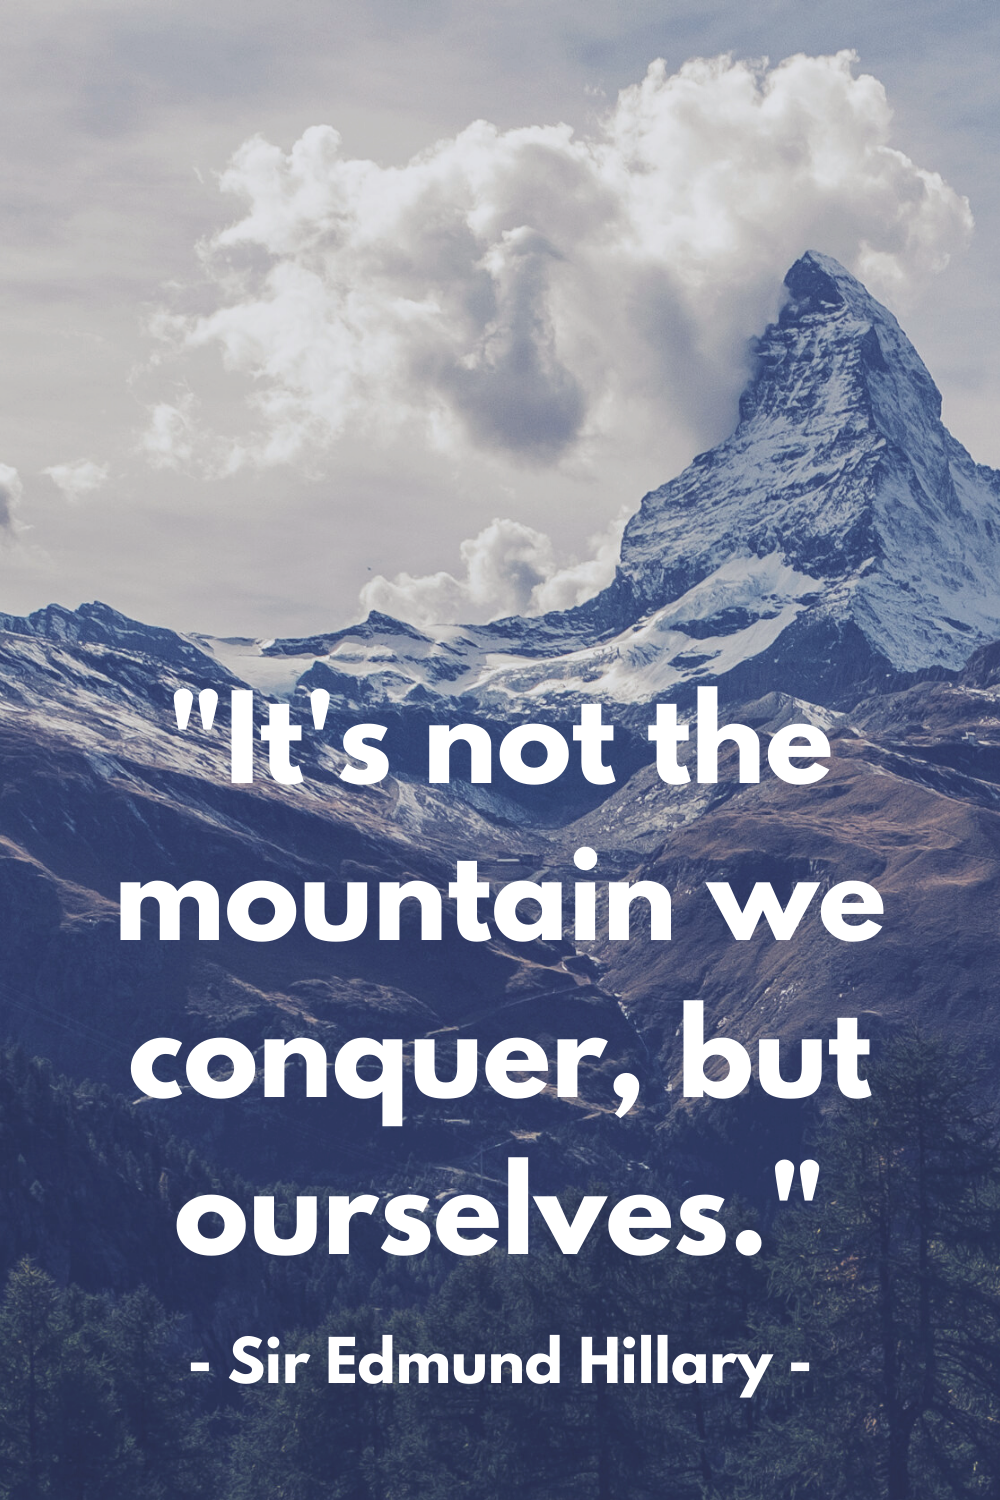 Motivational Quote -- Its not the mountain that we conquer, but ourselves.